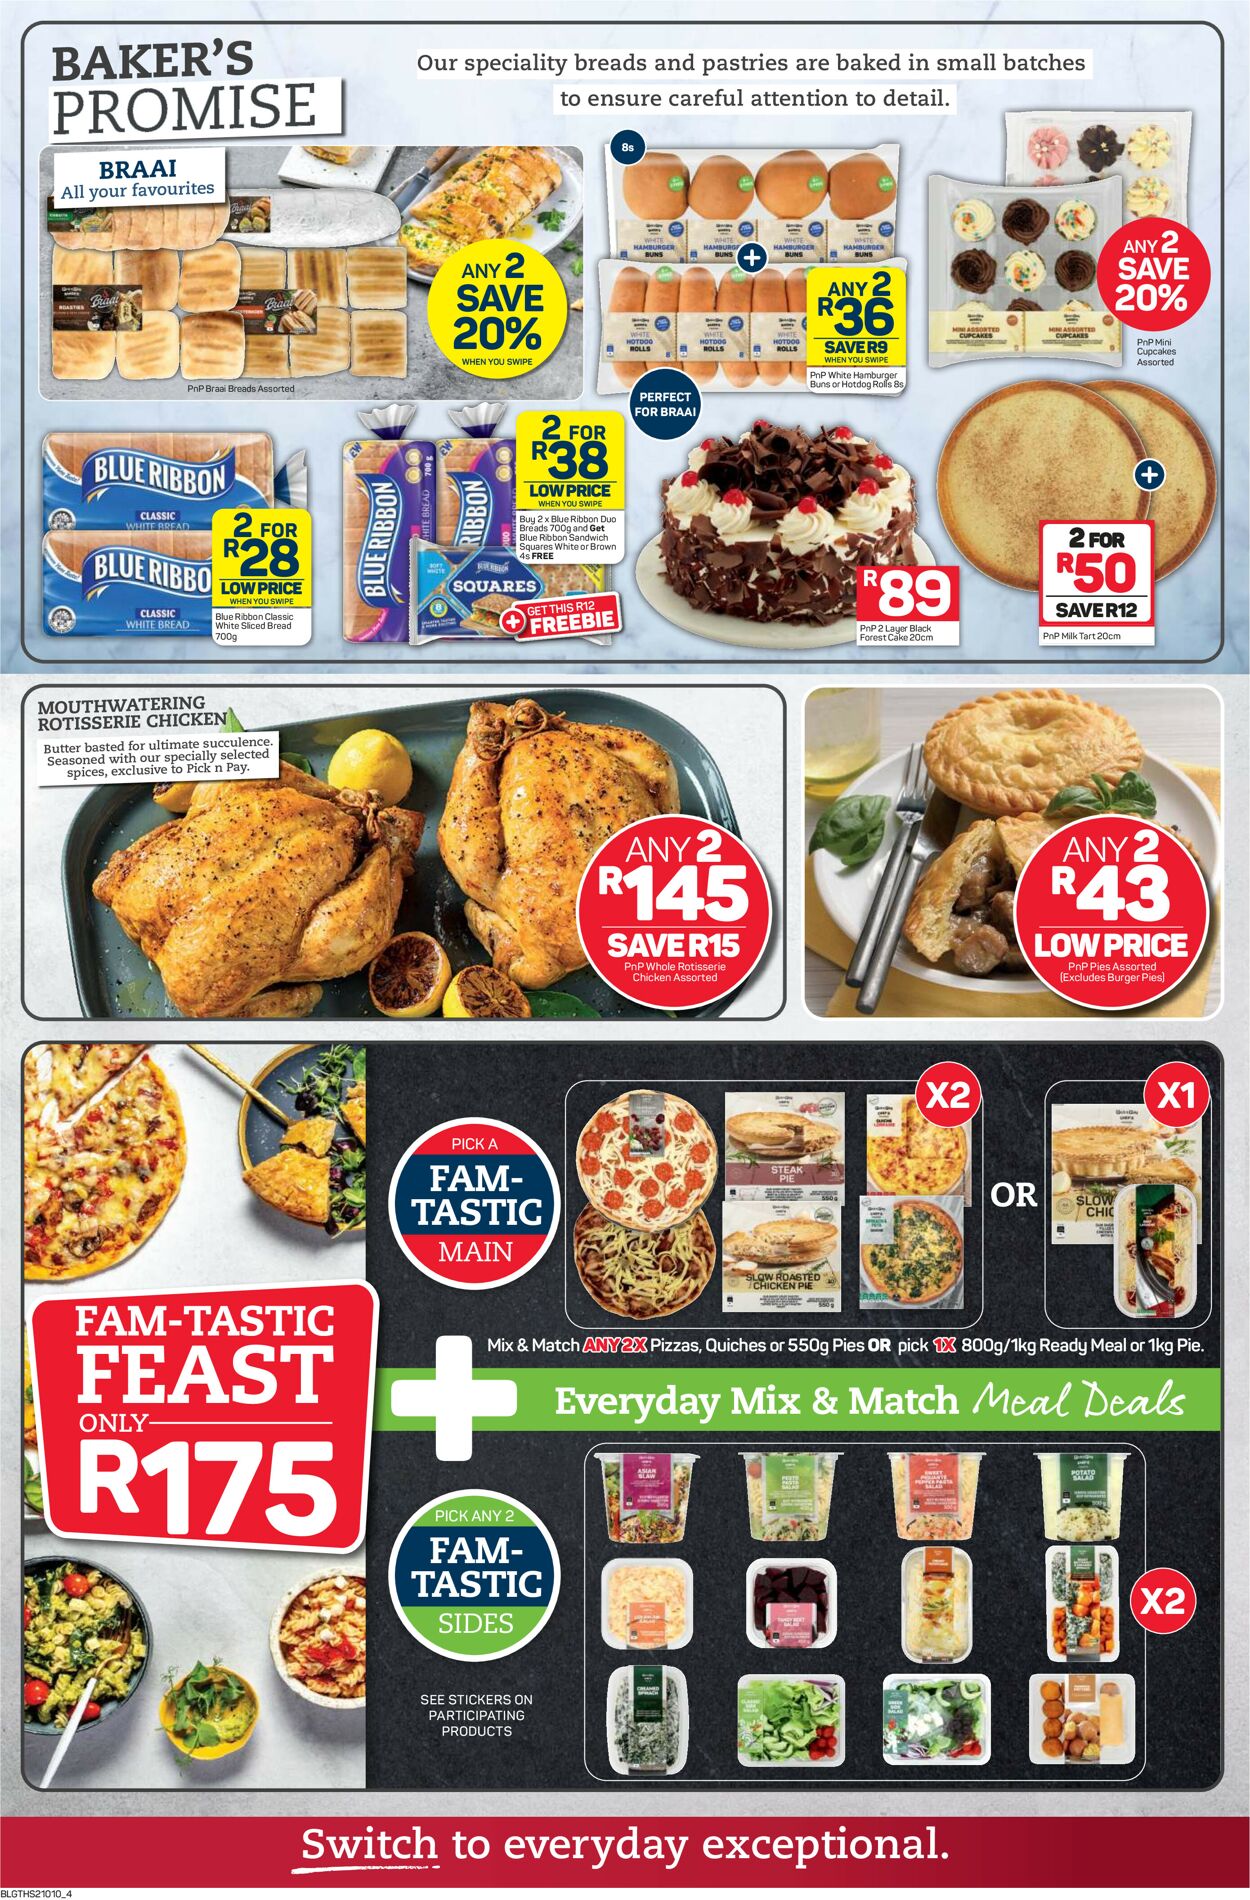 Pick n Pay Catalogue - 2022/09/19-2022/10/02 (Page 4)